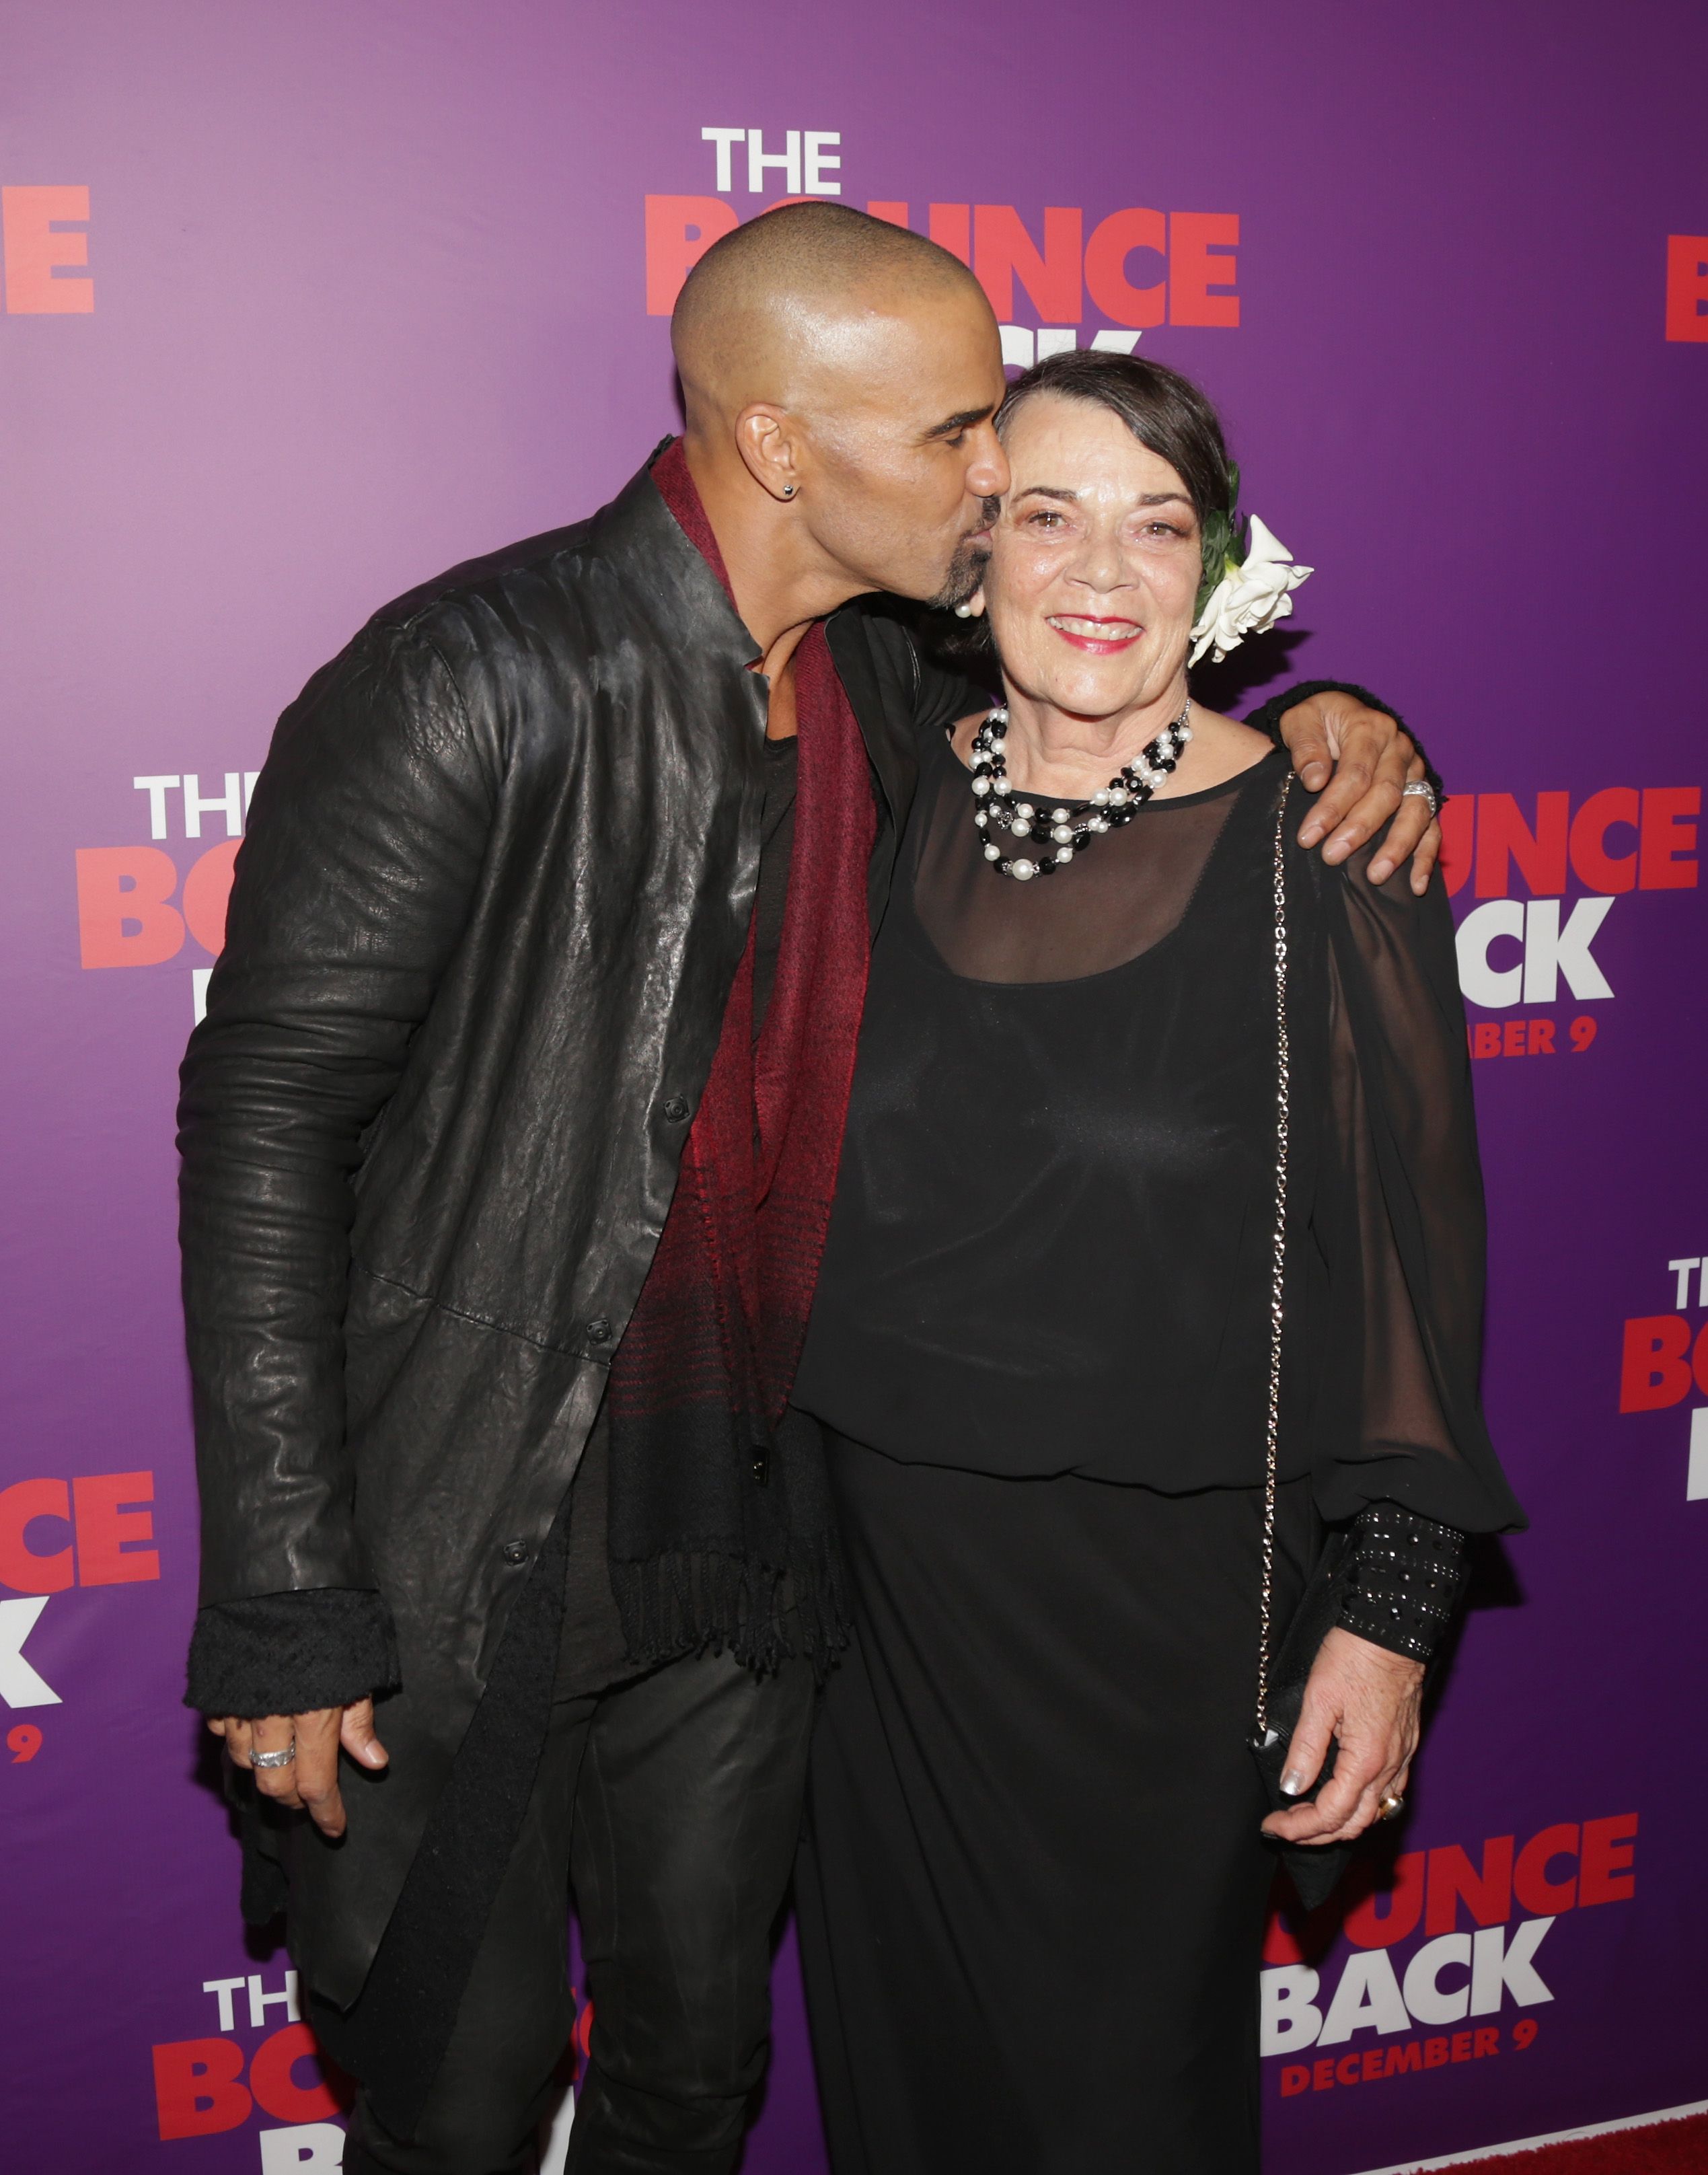 Shemar Moore and his mother Marilyn Wilson at the premiere of "The Bounce Back"in 2016 in Los Angeles | Source: Getty Images